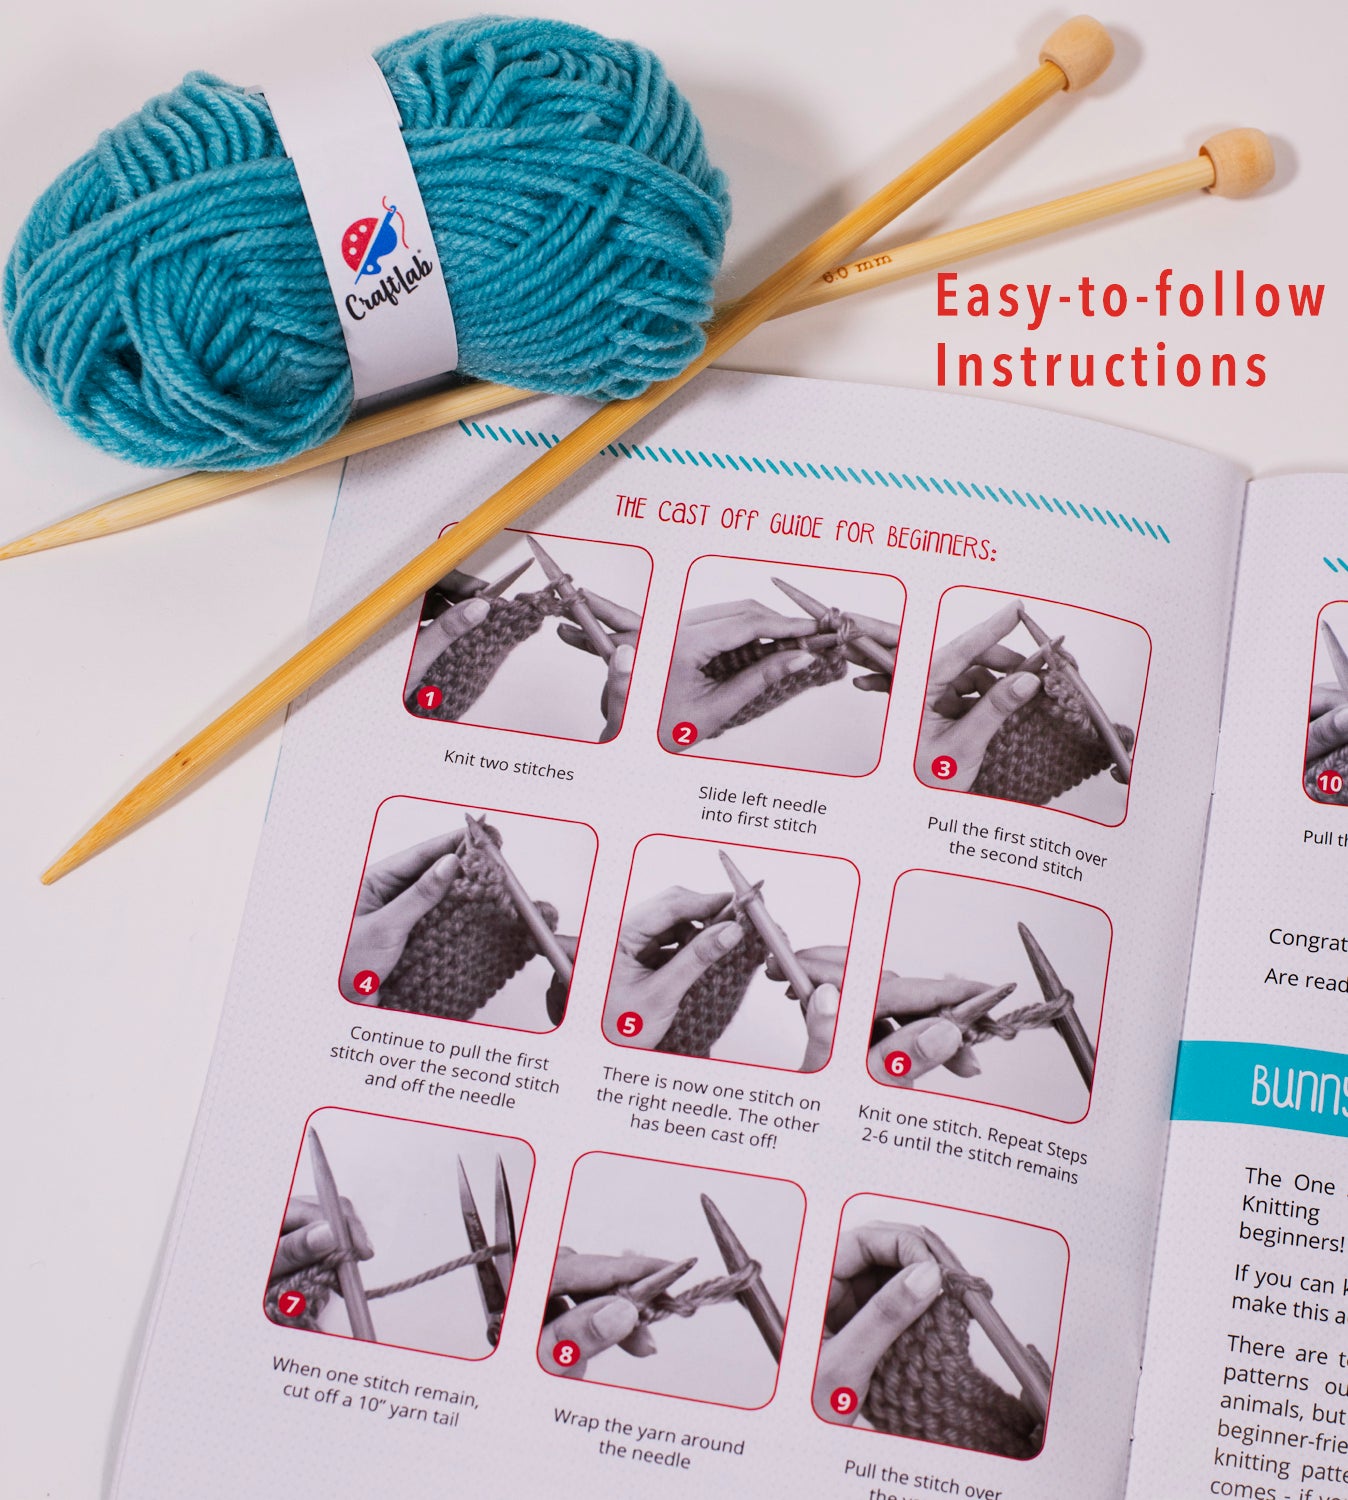  The Spinning Hand Learn to Knit Kit - Craft Kit for Adults and  Teens - Make a Scarf - All Supplies and Instructions Included - New and  Improved - Dragonfruit